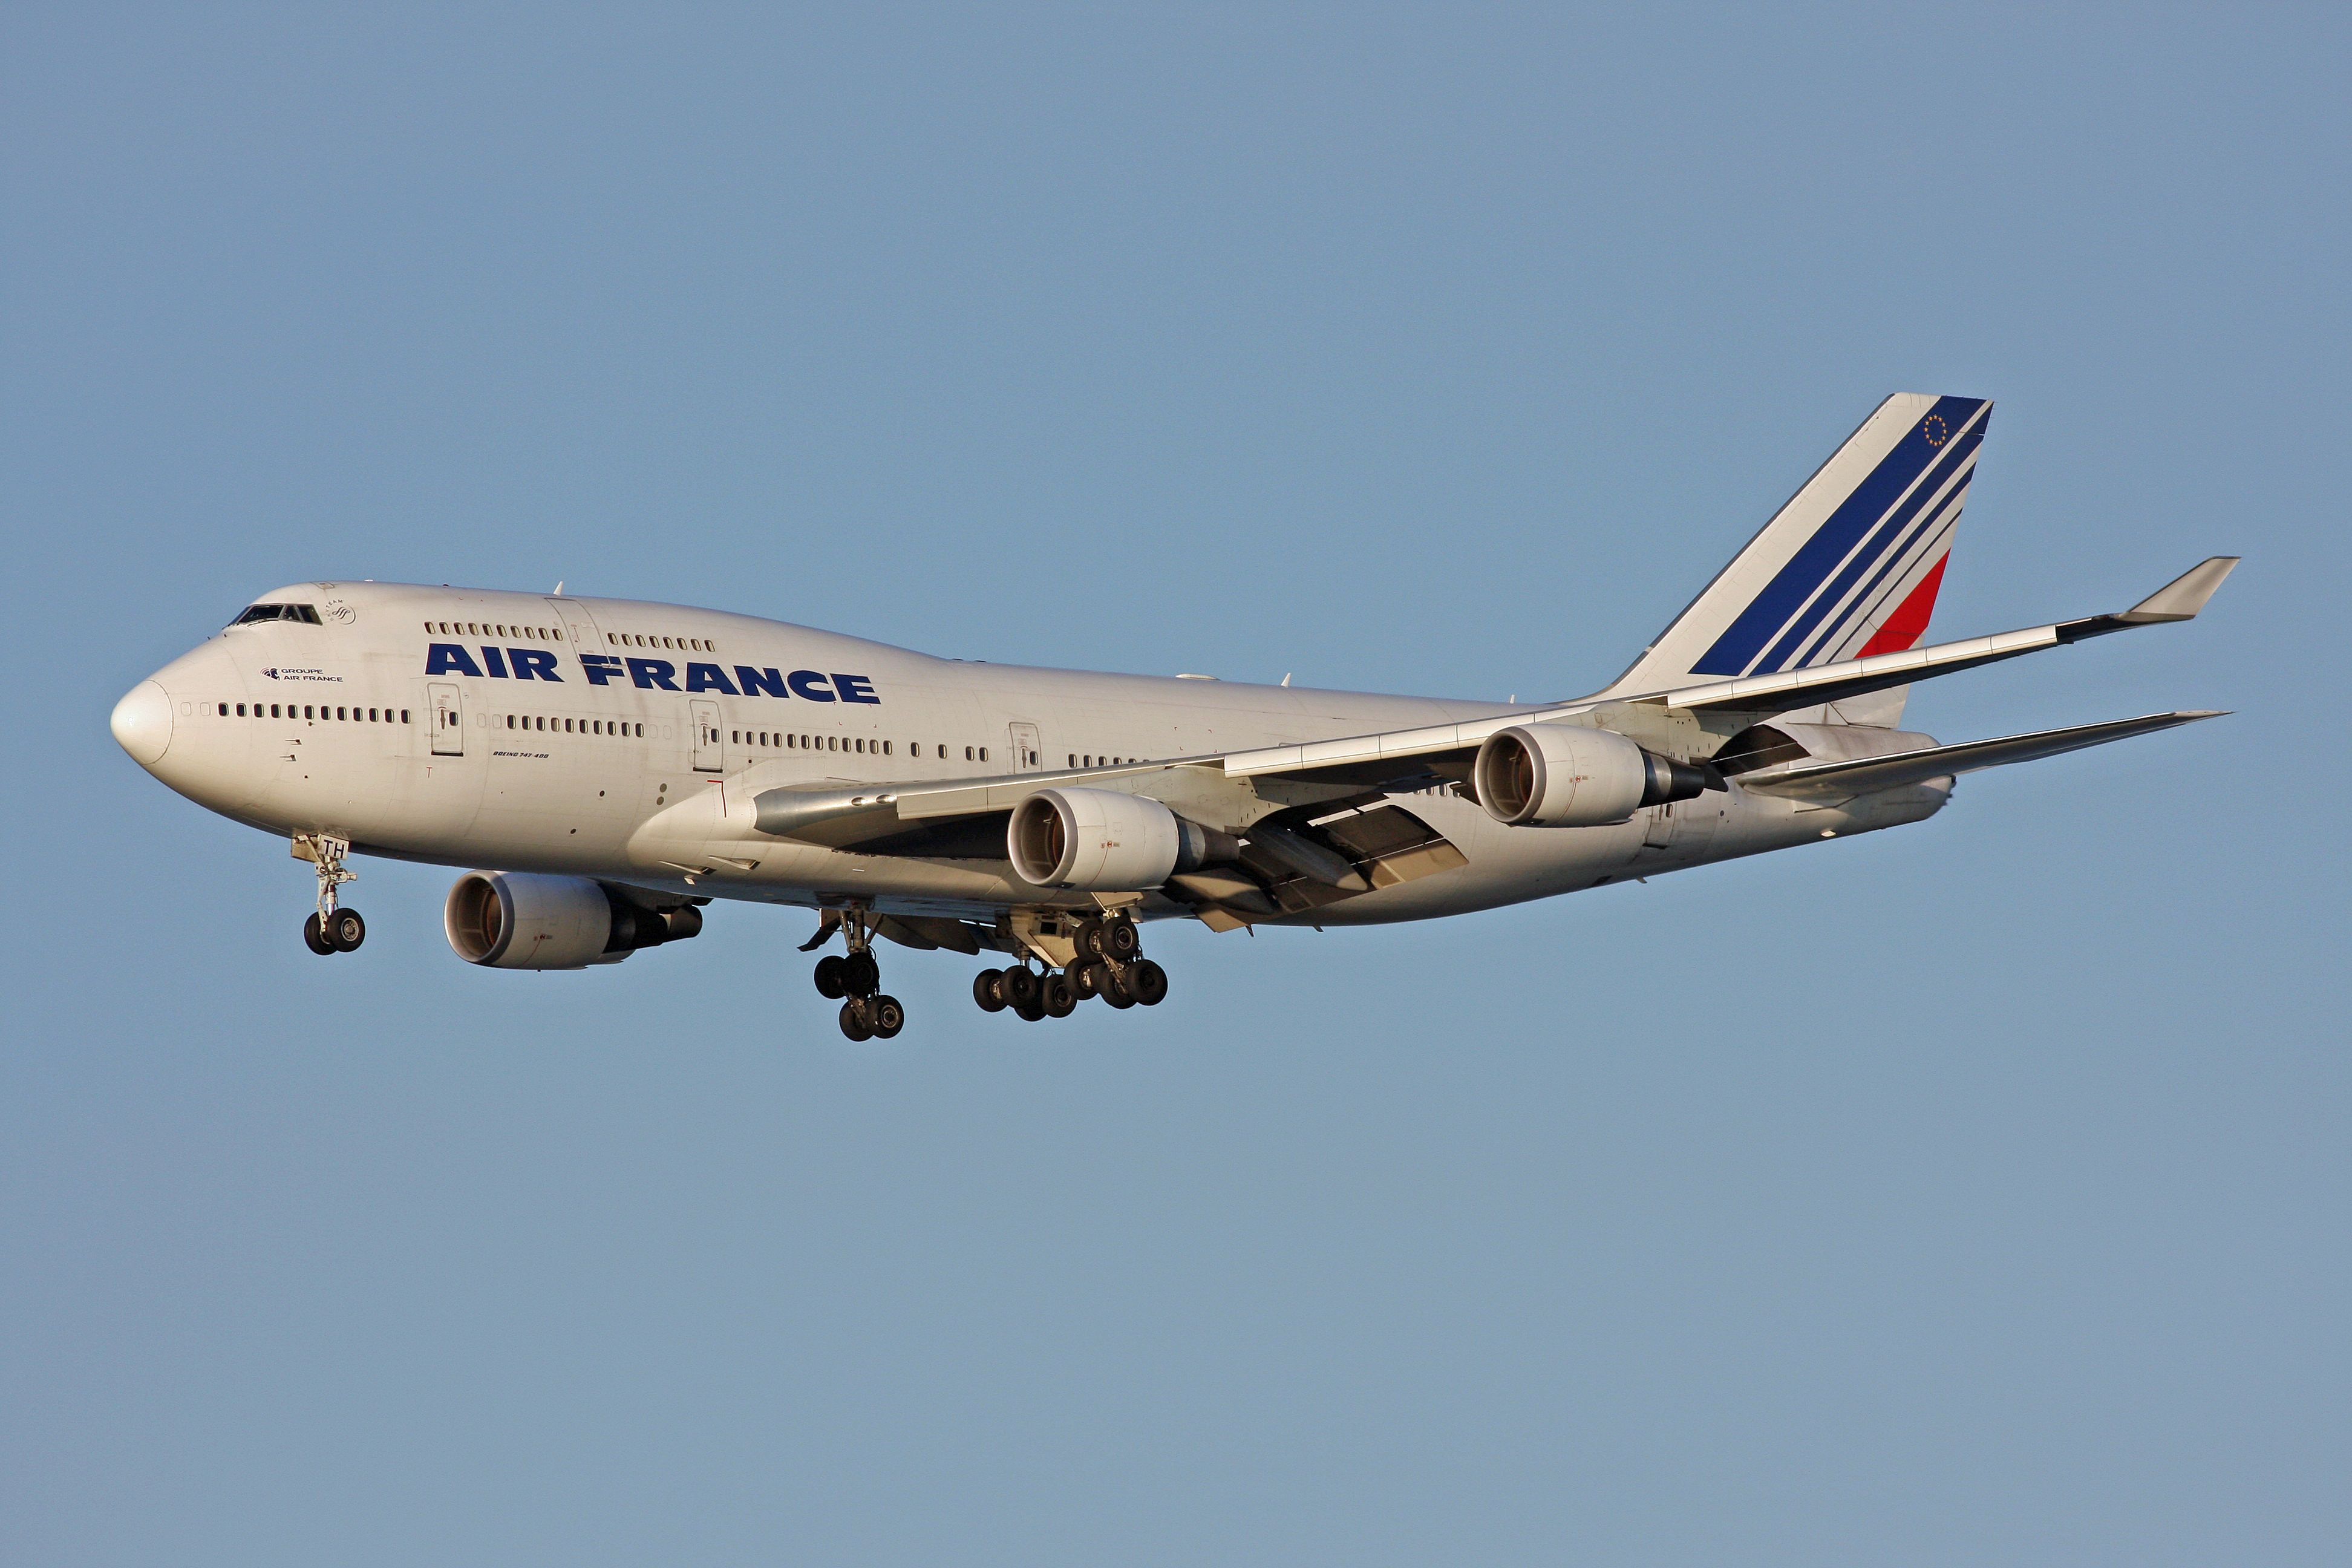 An Air France Boeing 747 flying in the sky.